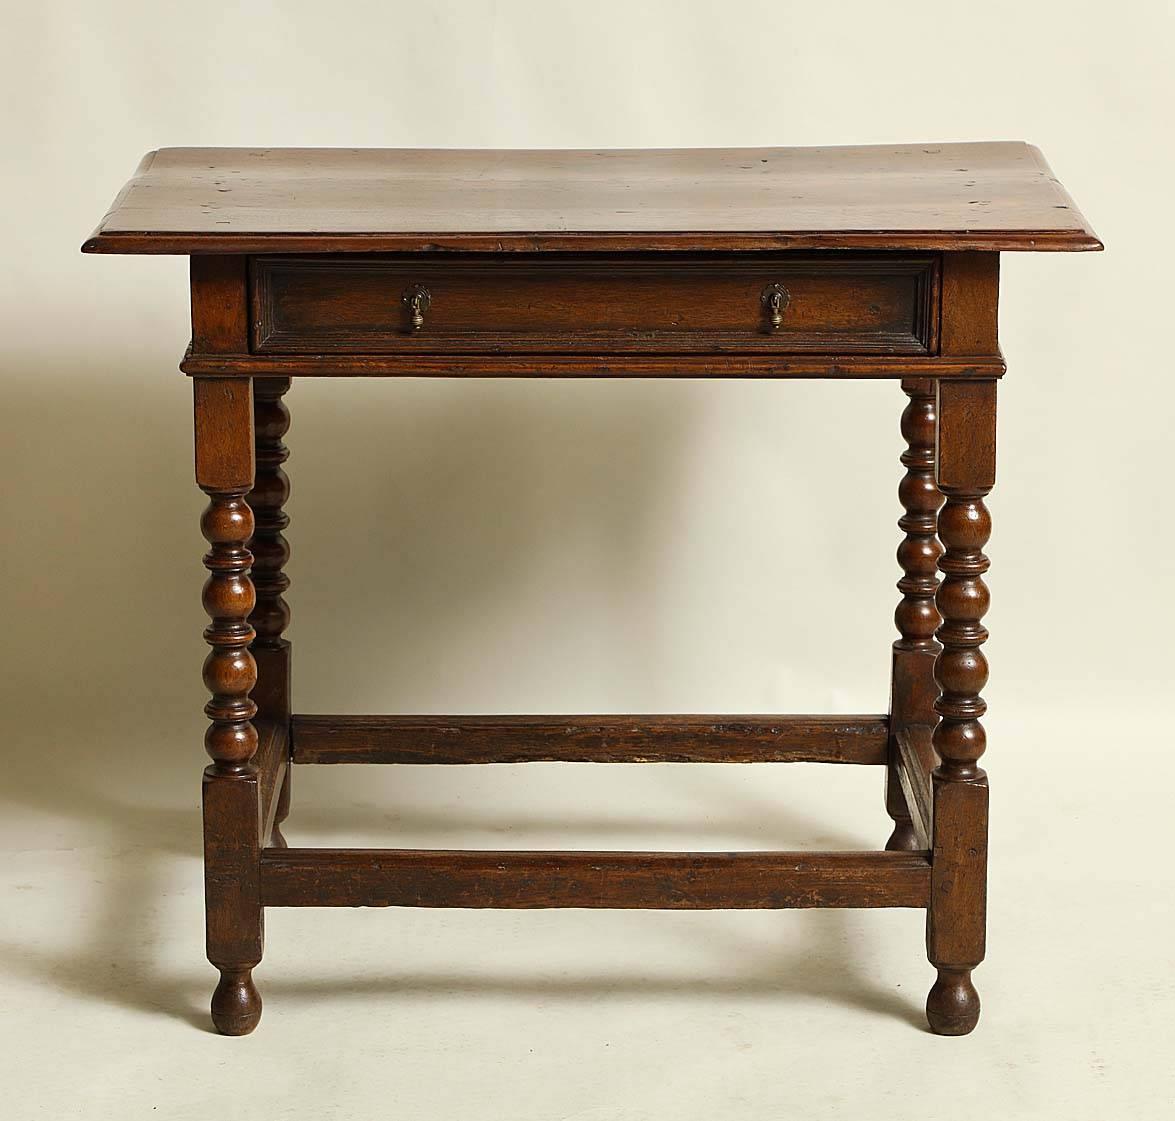 Good English late 17th century oak side table, the molded two plank top over single molded front drawer, standing on bobbin and reel turned legs joined by box stretcher and standing on original turned feet.

Measures: .29.75